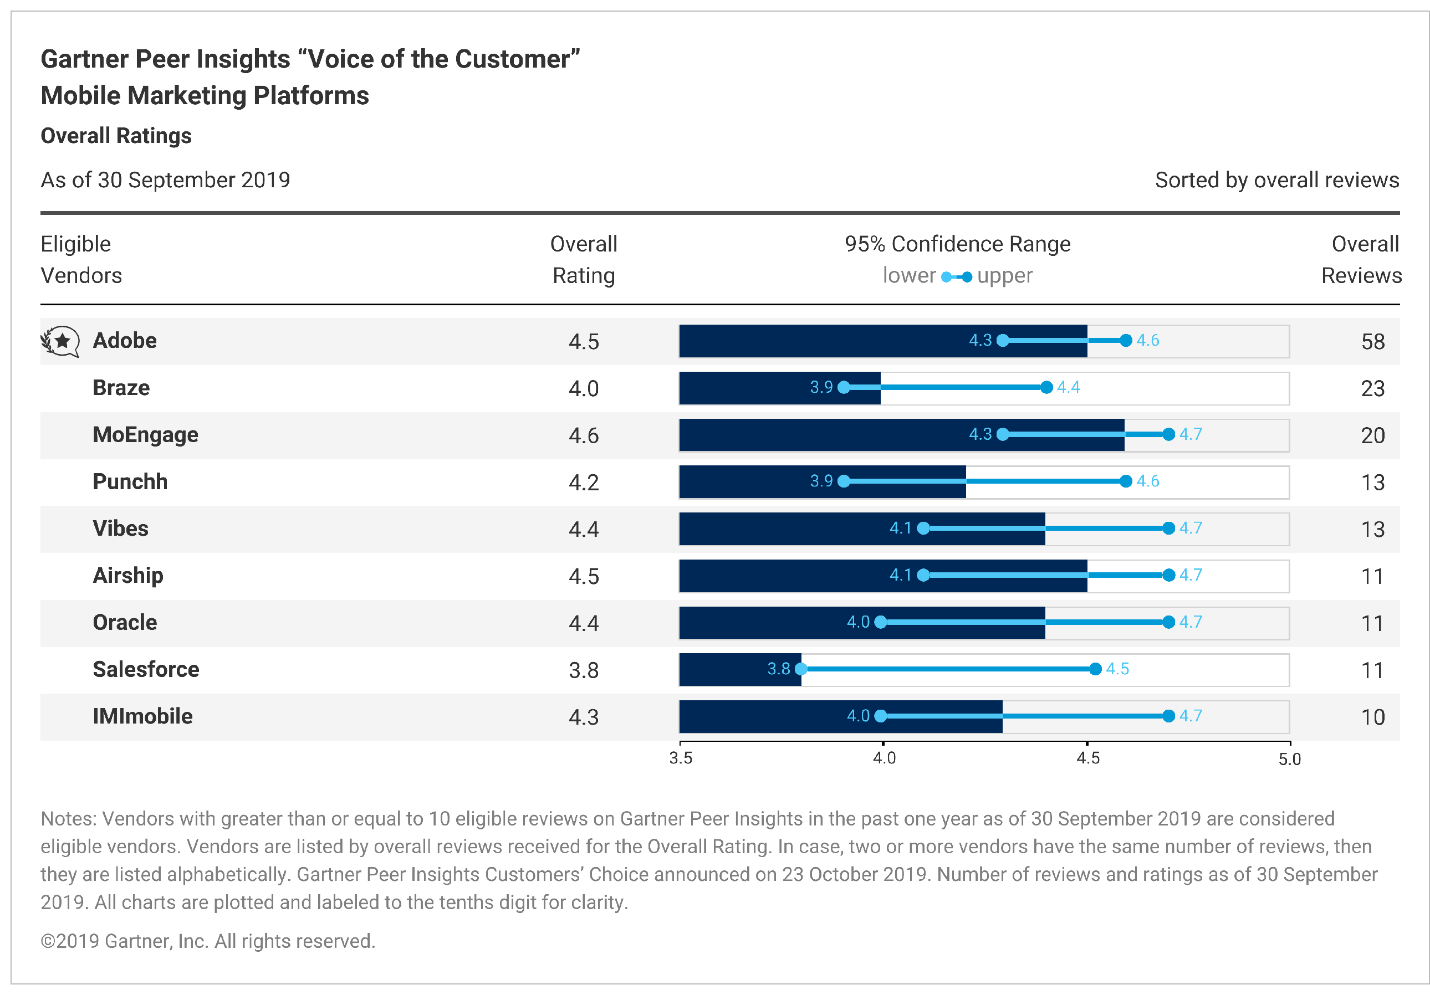 Overall Ratings - Gartner Peer Insights ‘Voice of the Customer’ Report for Mobile Marketing Platforms.